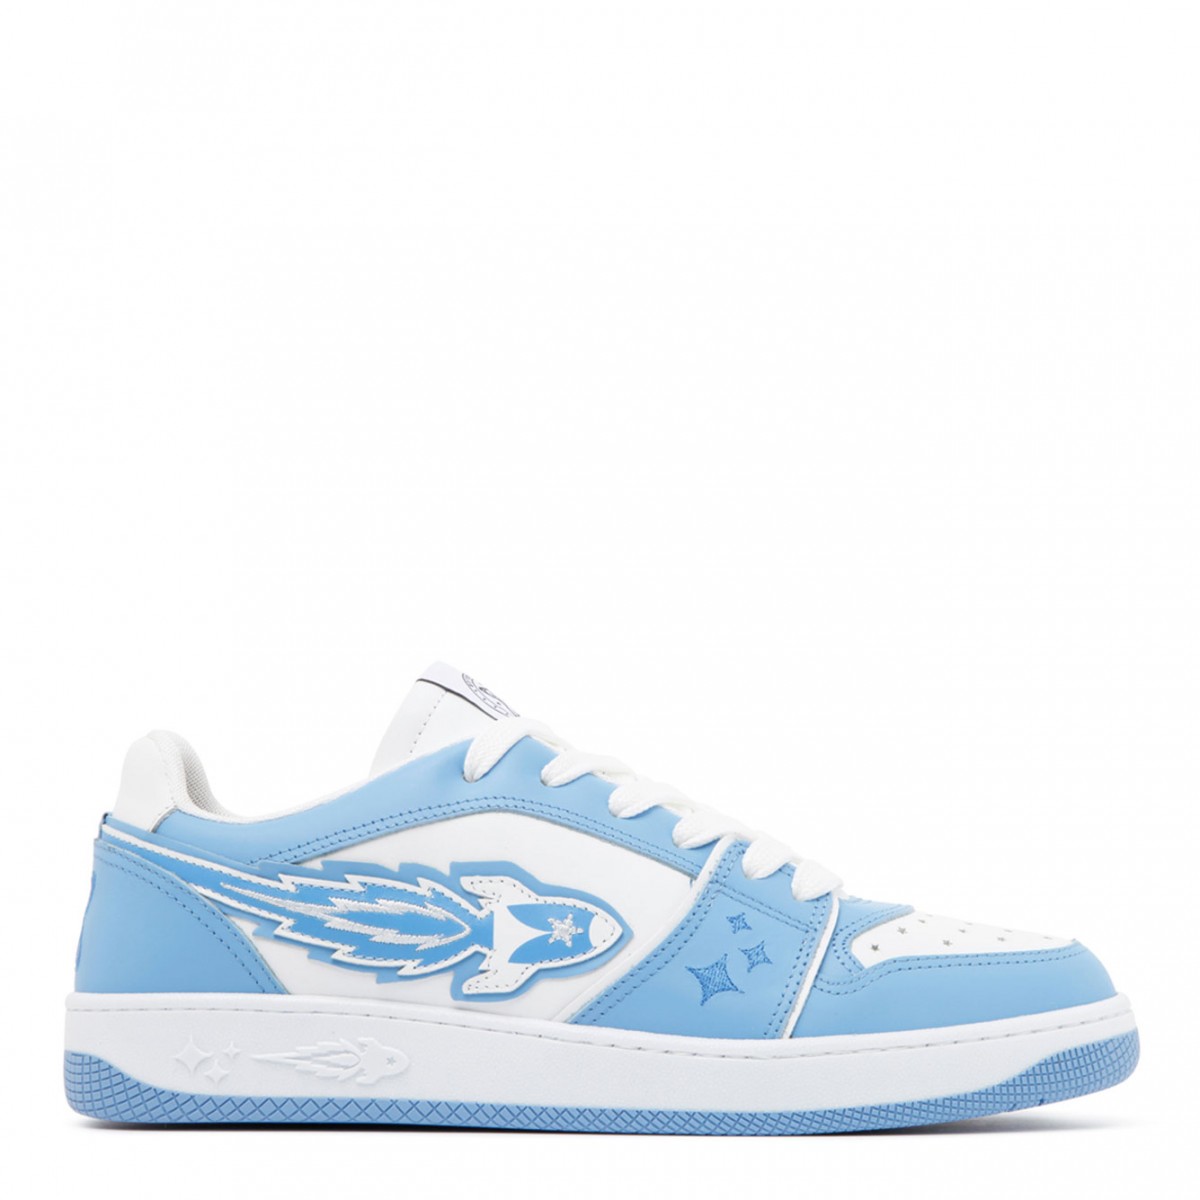 Enterprise Japan White and Blue Calf Leather Panelled Low Top Sneakers.